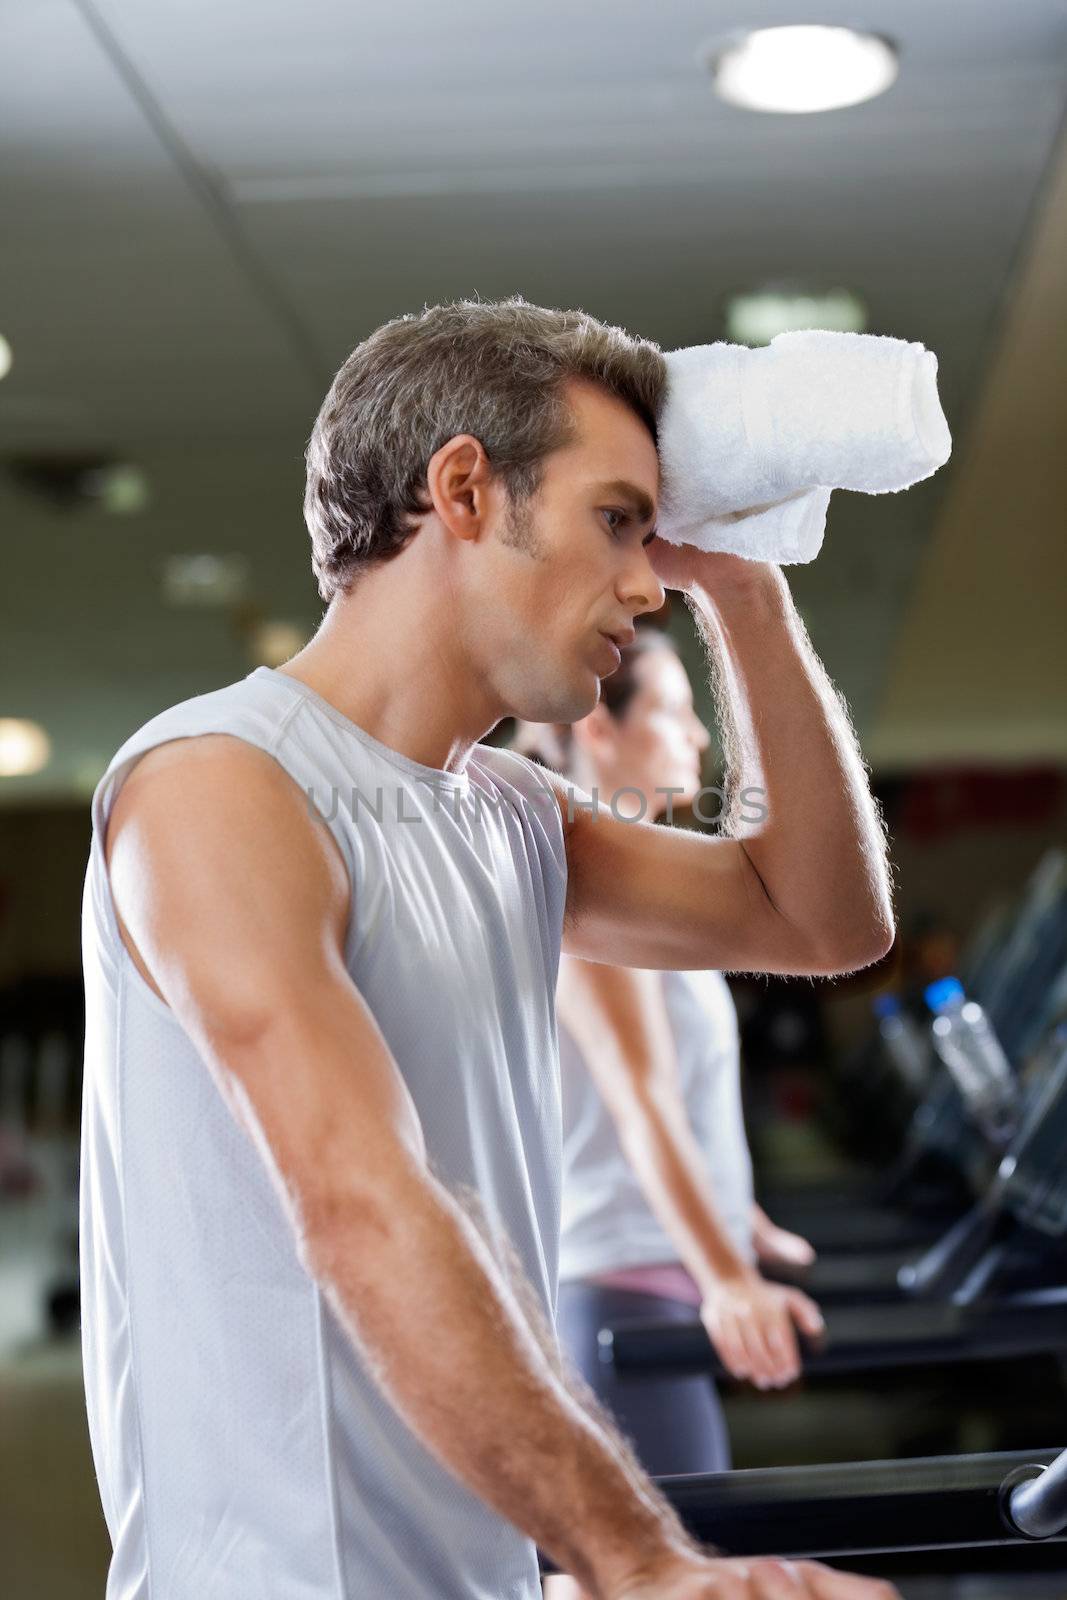 Side view of young man wiping sweat with towel at health club.